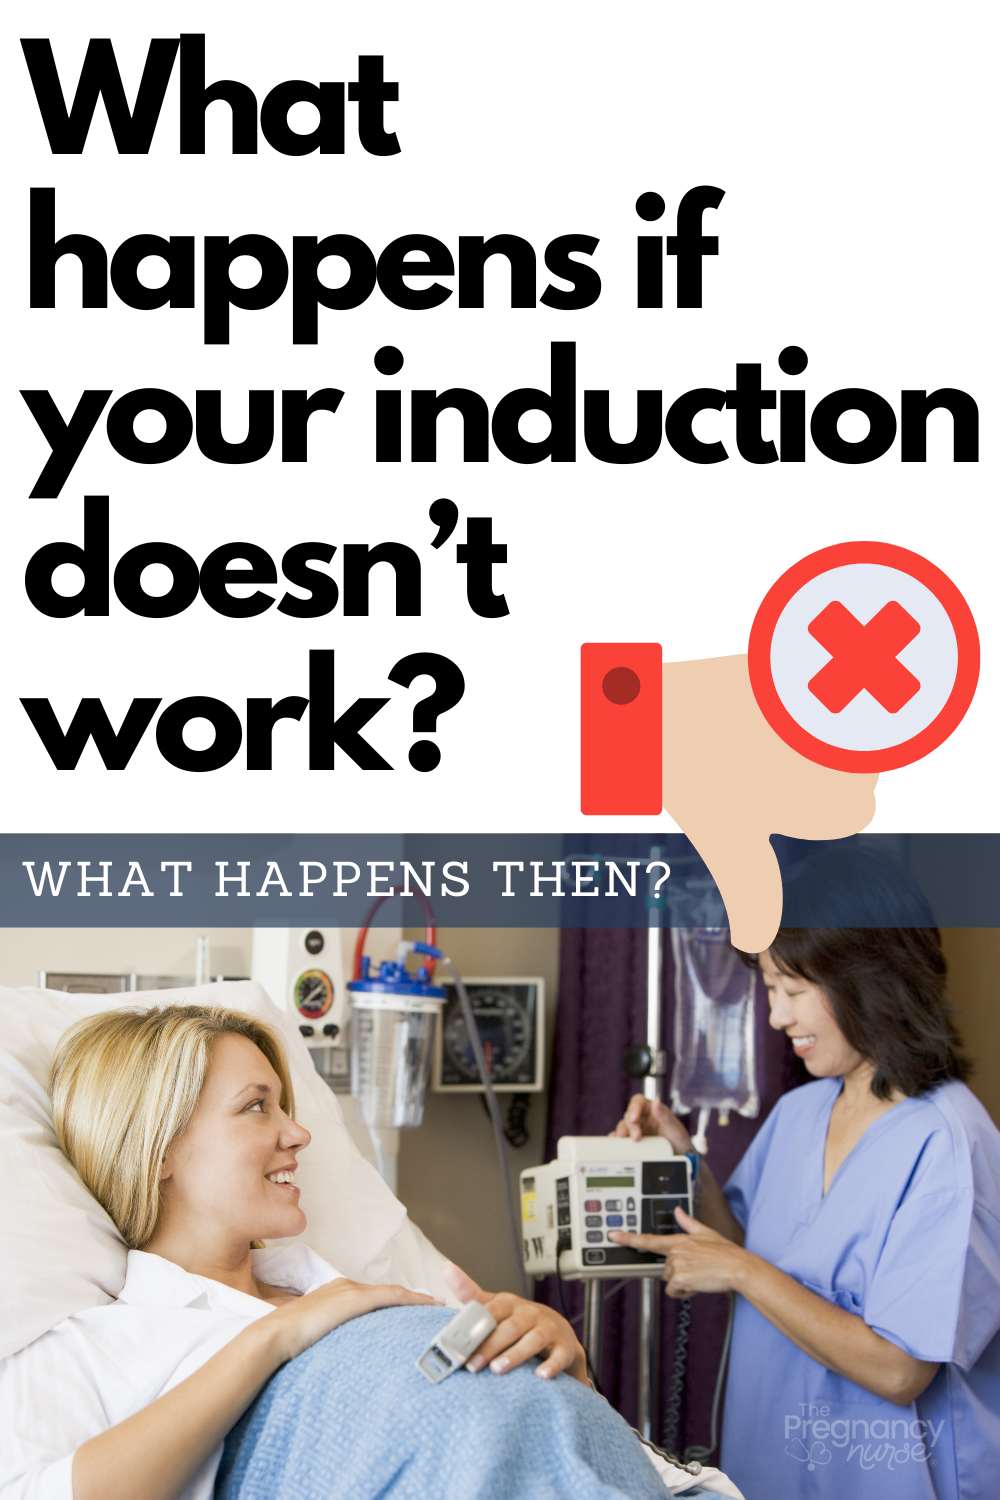 What happens when your induction fails? It's a question many expecting mothers face but are too afraid to ask. Let's walk through the three potential paths your induction might take. Spoiler alert: One of them may surprise you!